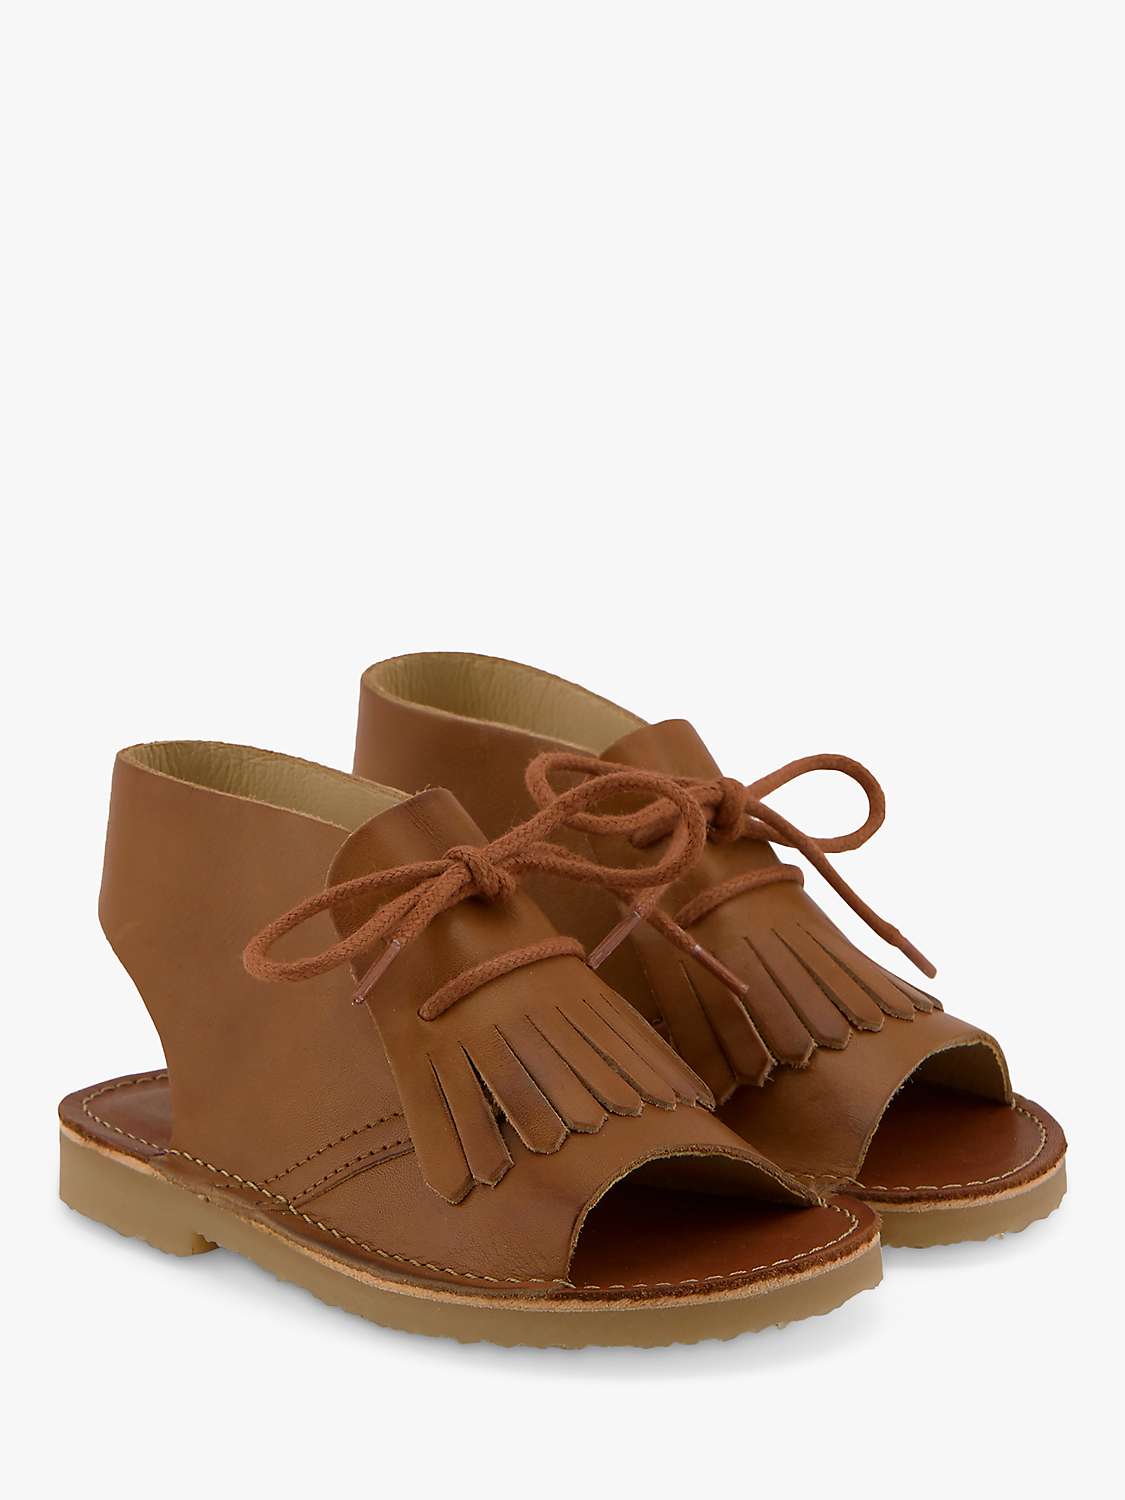 Buy Young Soles Kids' Leather Agnes Kilted Sandals, Tan Burnished Online at johnlewis.com